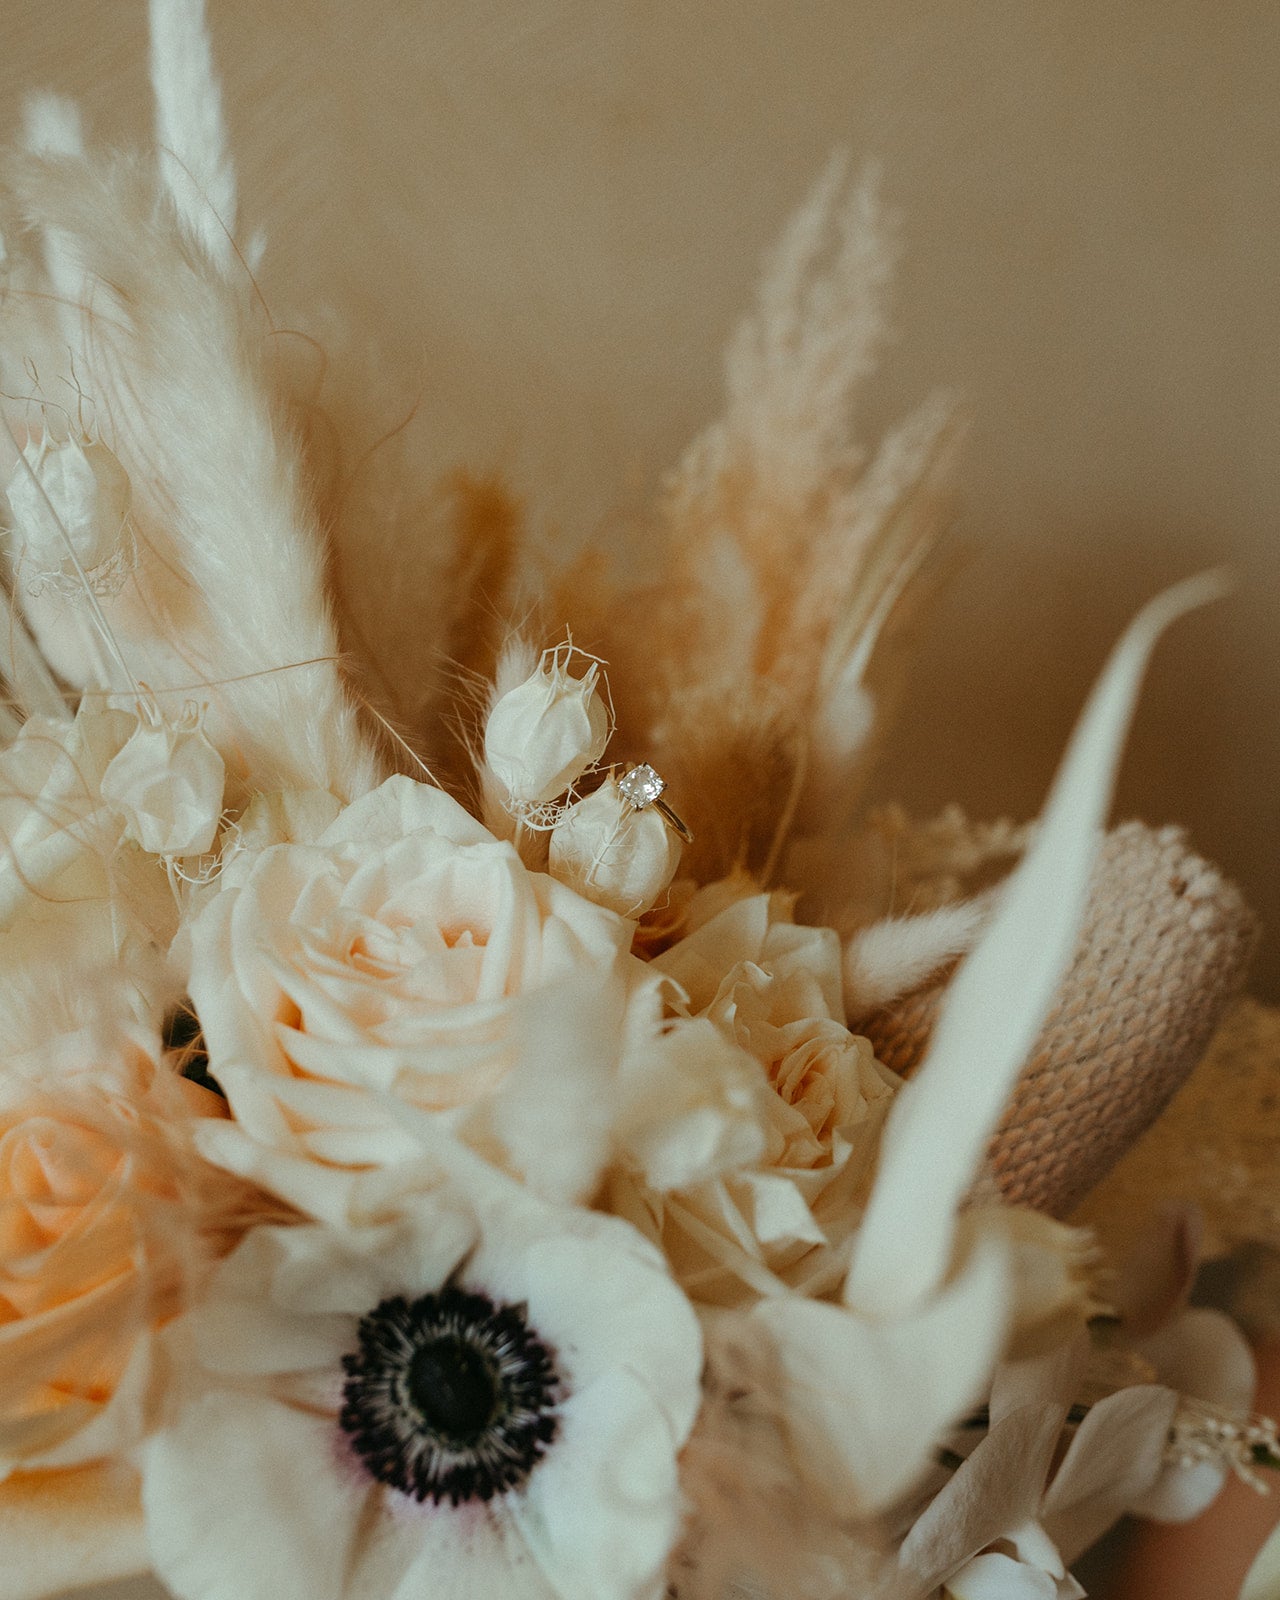 Dried and fresh mixed bridal bouquet with banksia and pampas